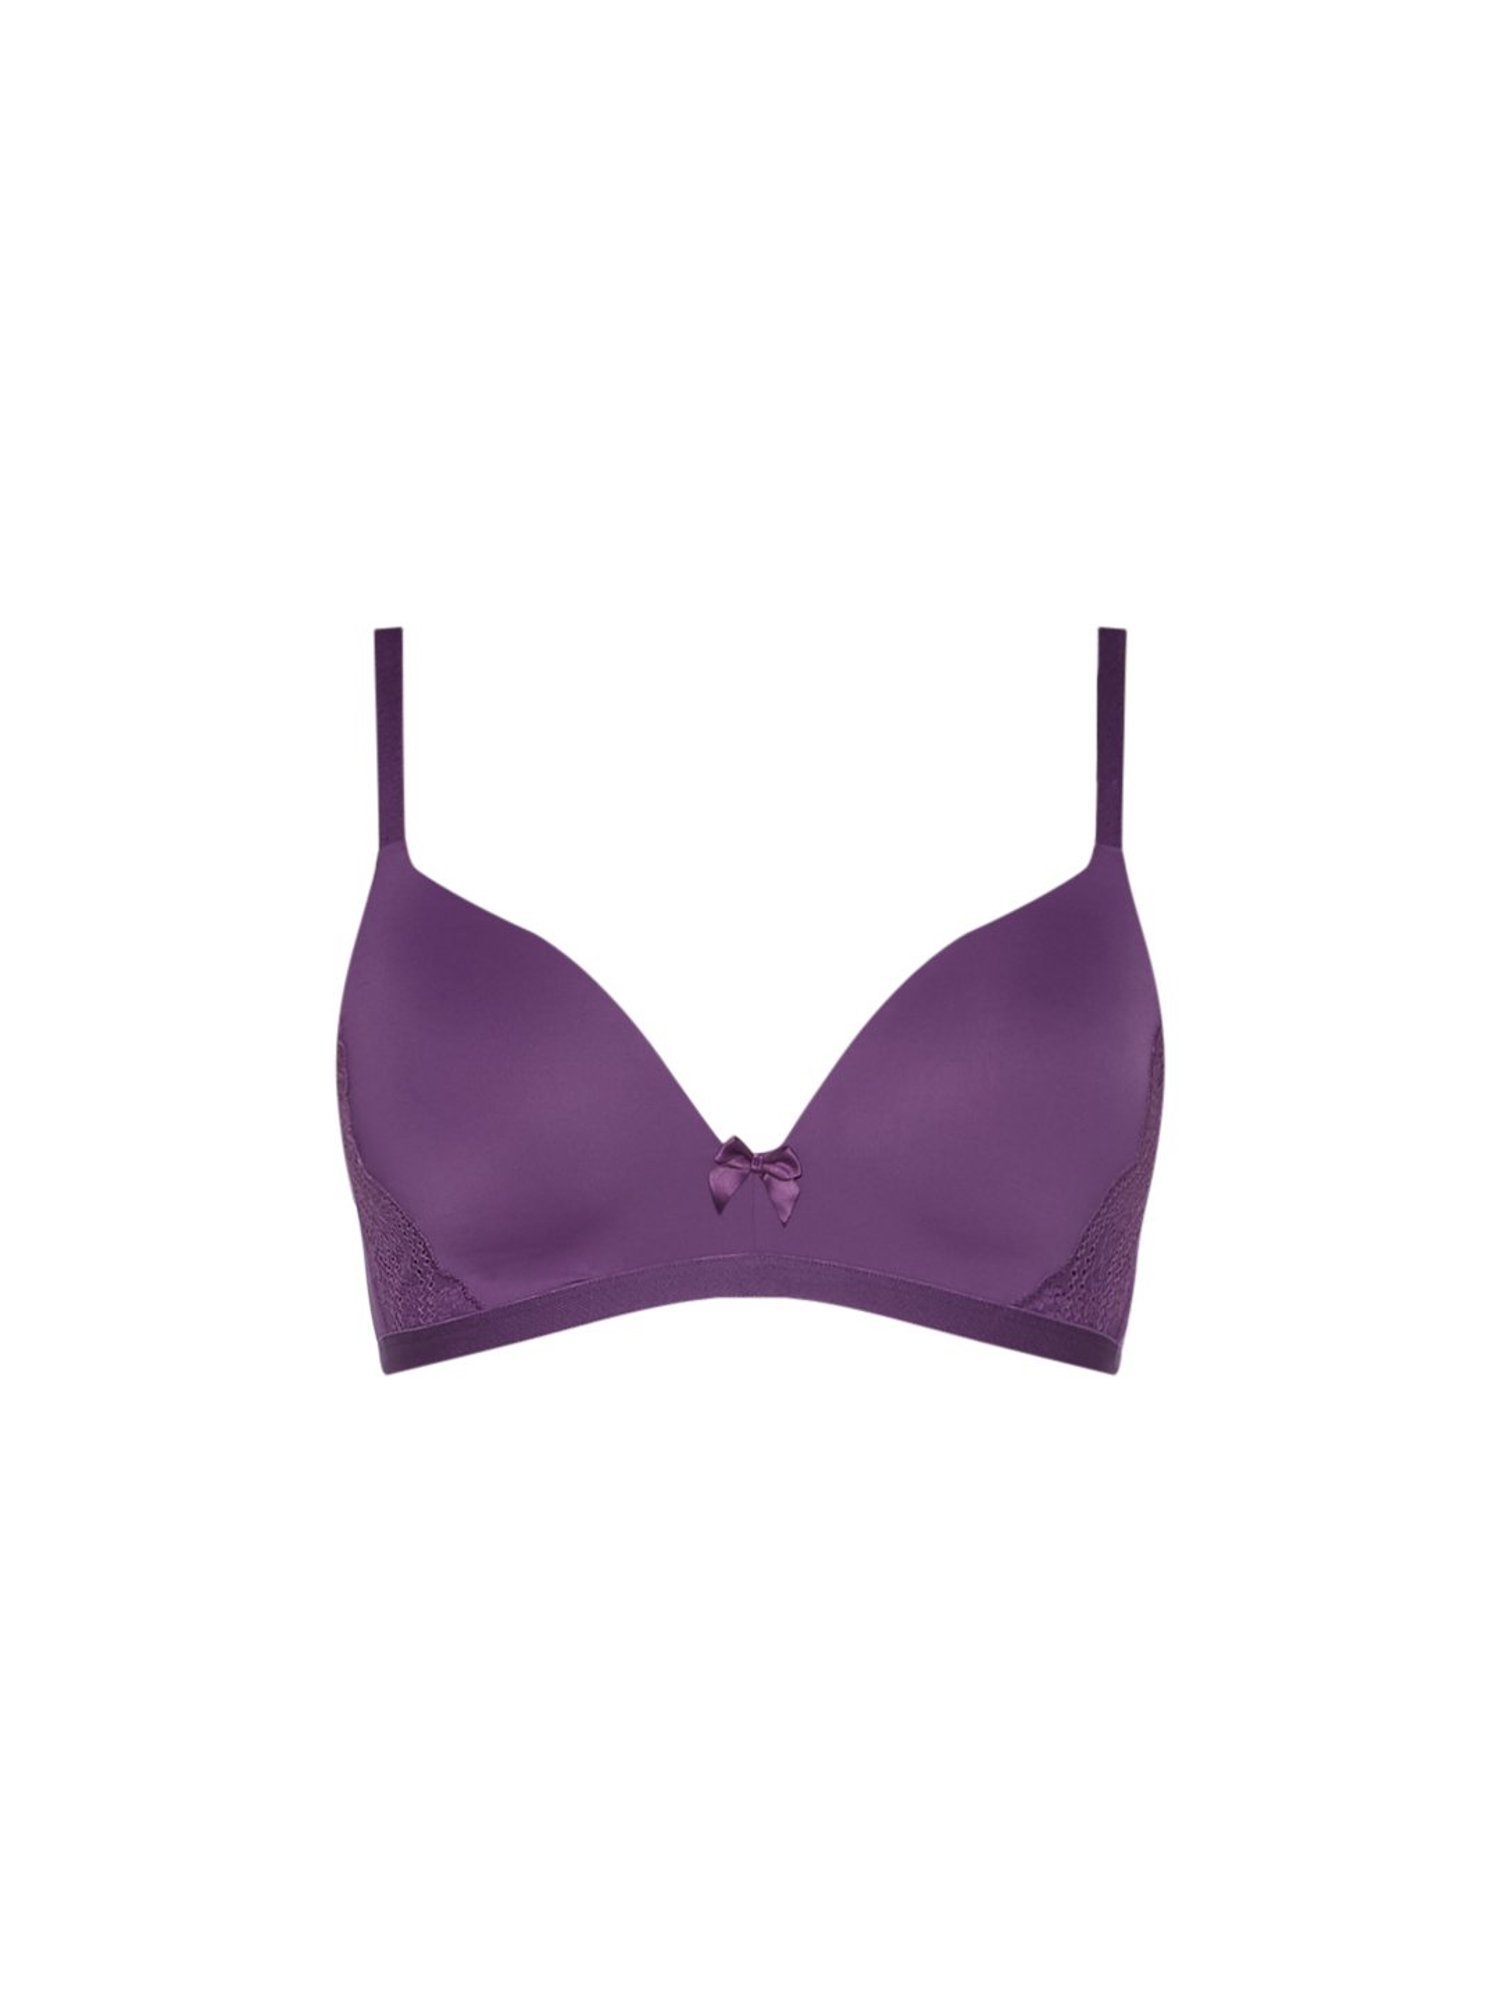 Wunderlove by Westside Purple Invisible Full Coverage Bra